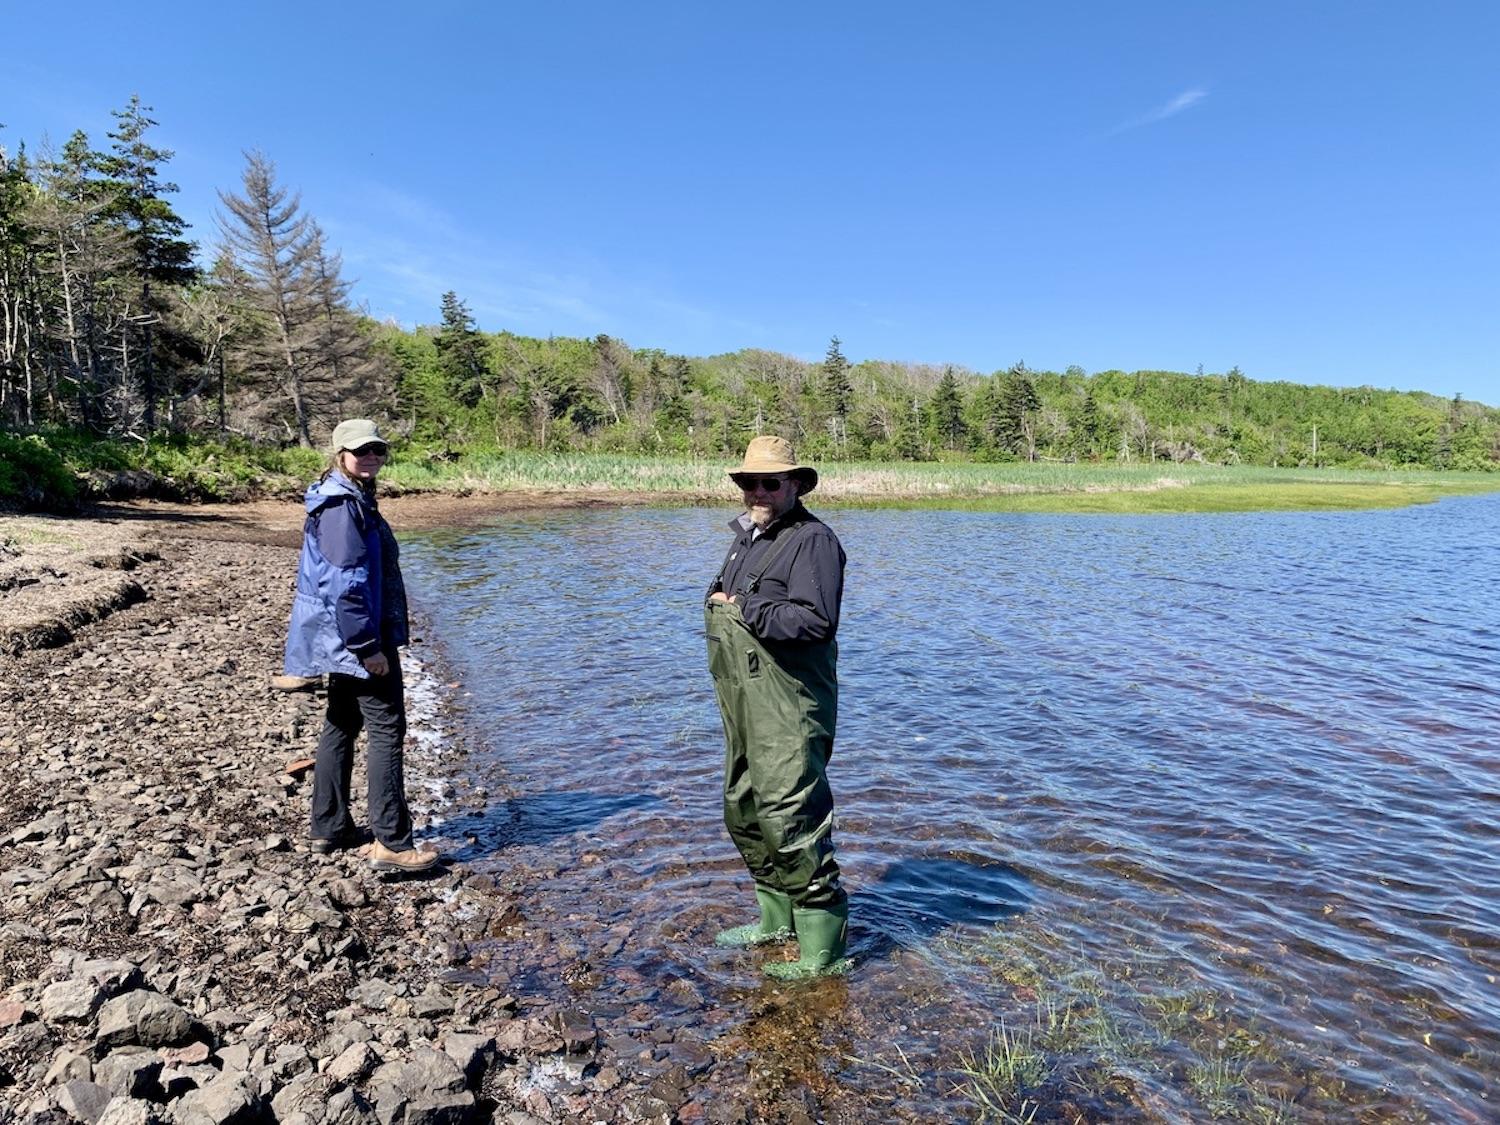 Archaeologist Helen Kristmanson and Parks Canada's Luke Arbuckle scour the shore and shallow water for things of interest.